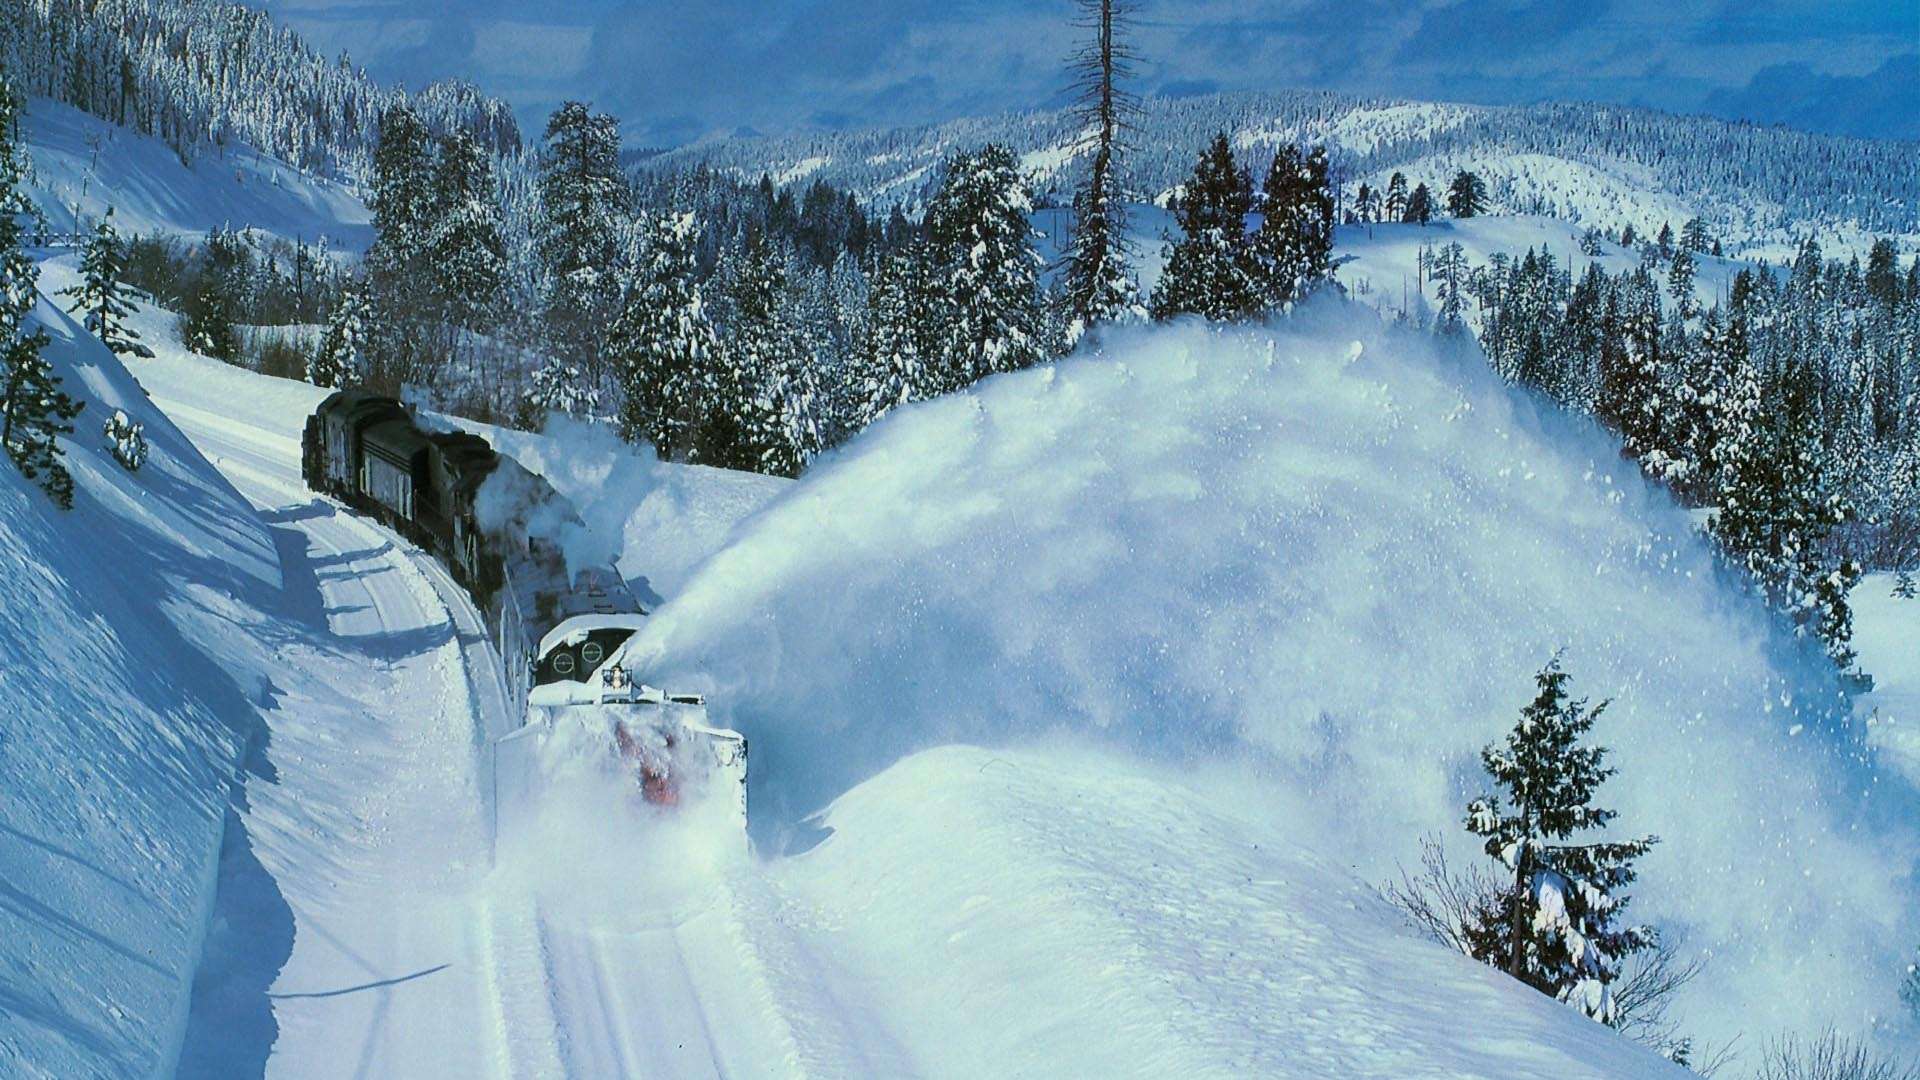 Clearing Snow in the Mountains HD Wallpaper FullHDWpp HD